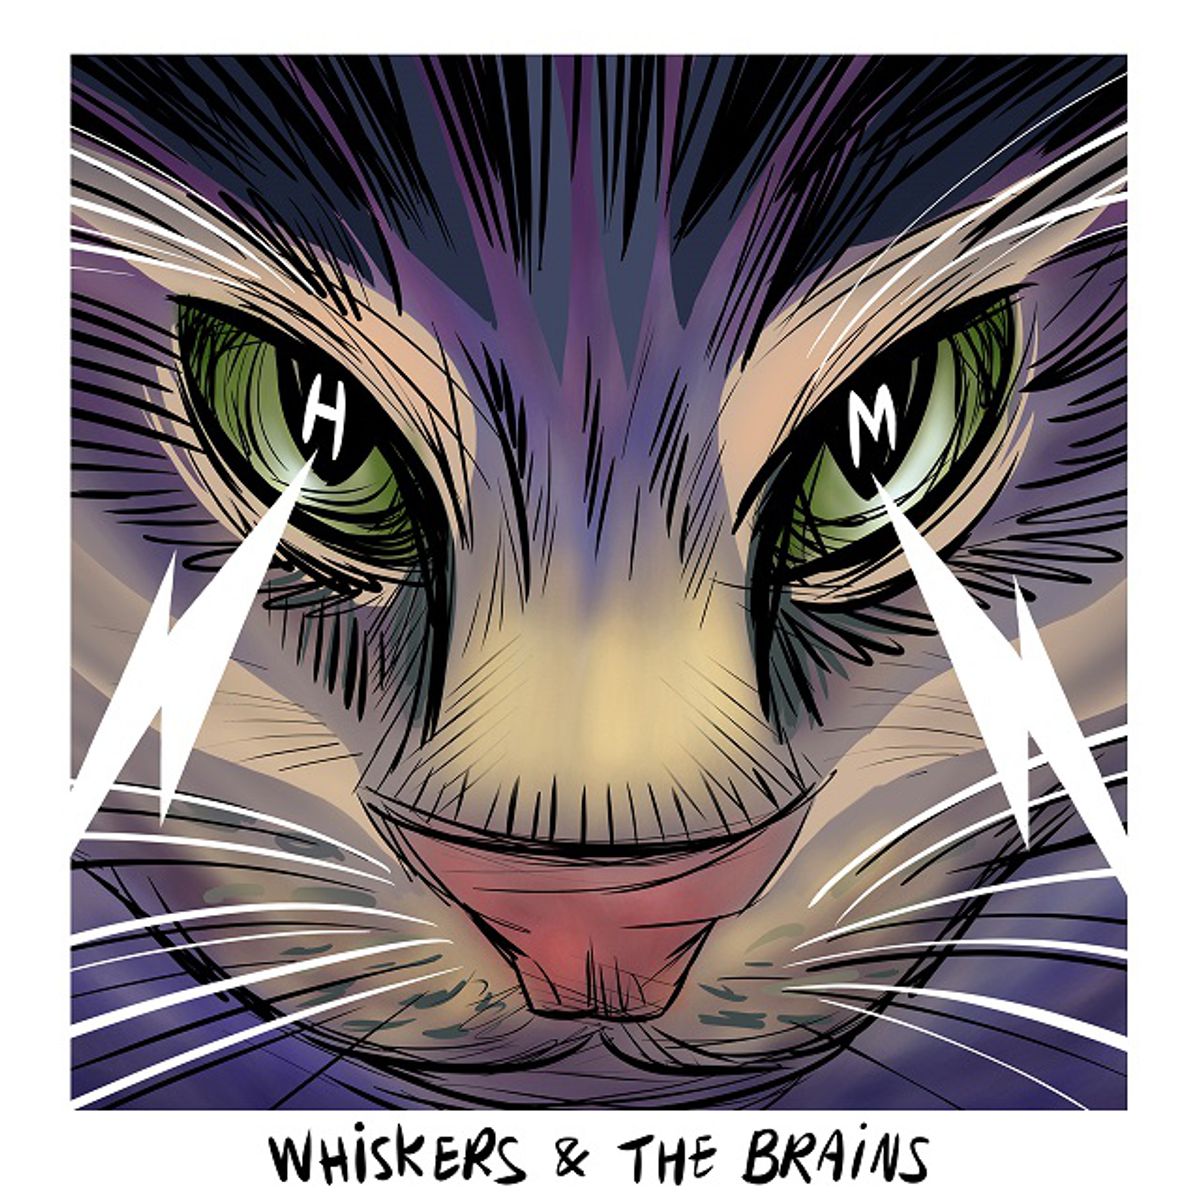 Whiskers & The Brains